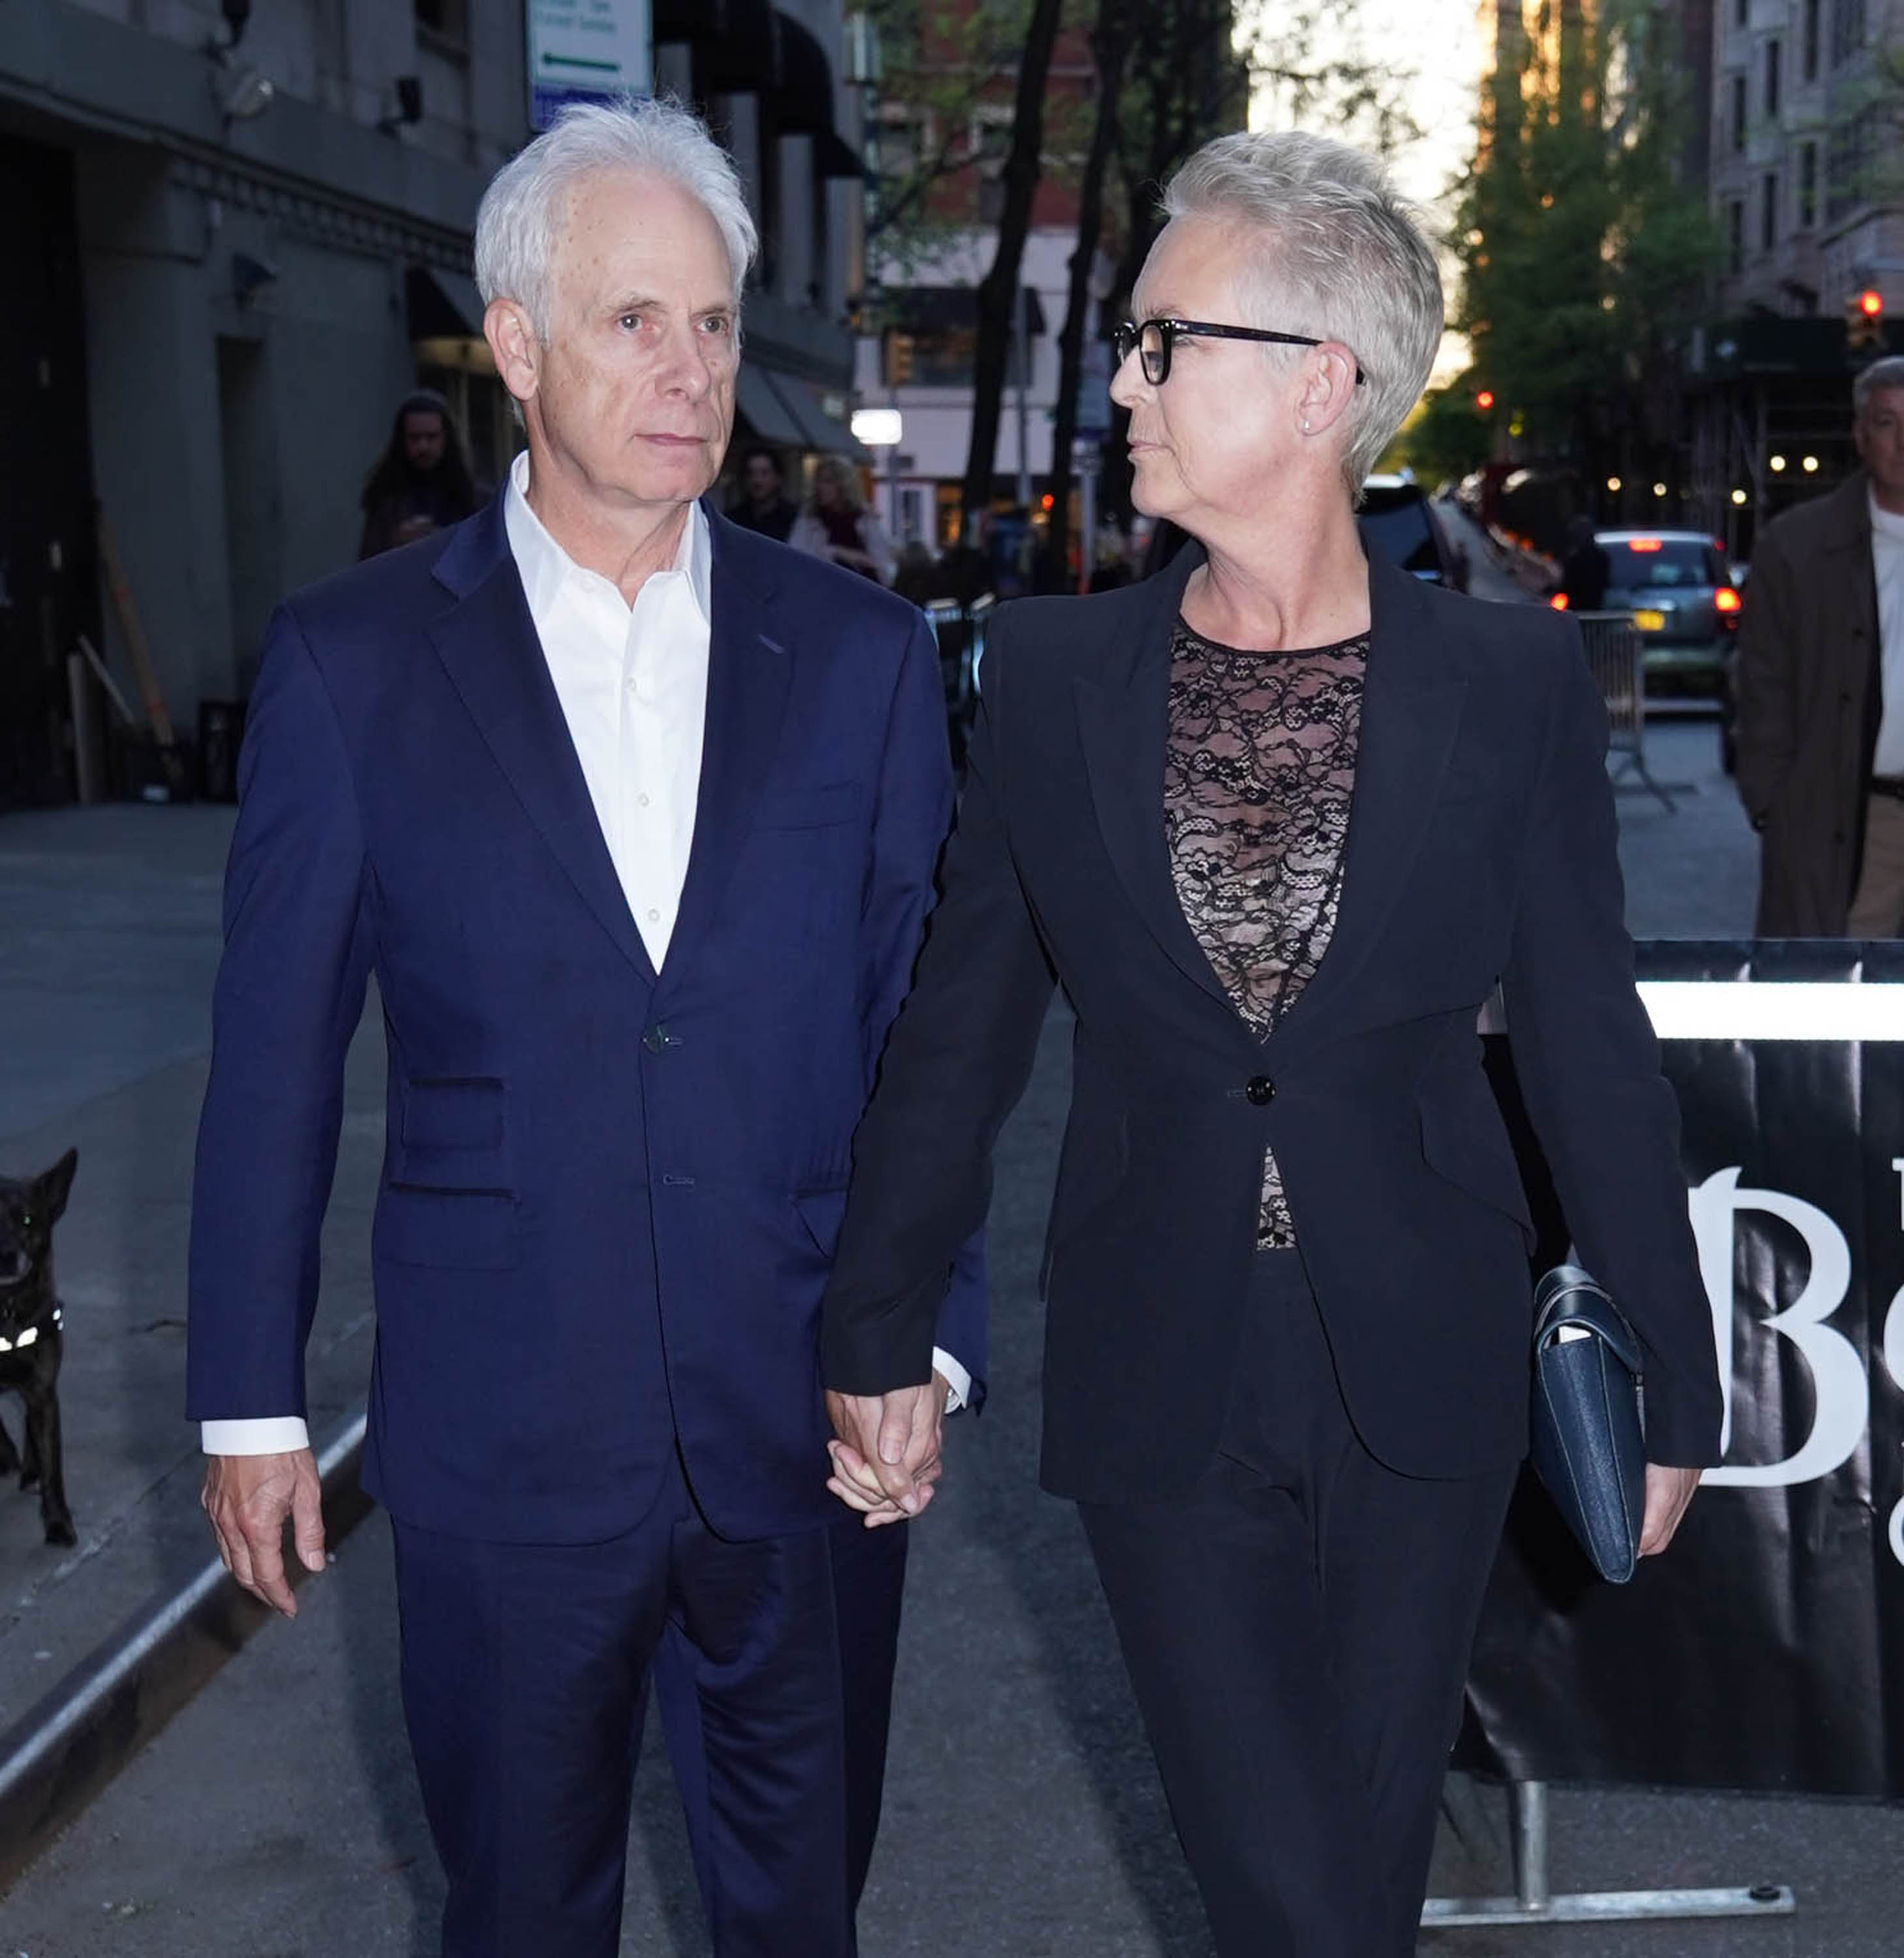 Jamie Lee Curtis and Christopher Guest are seen in New York City on April 27, 2019 | Source: Getty Images